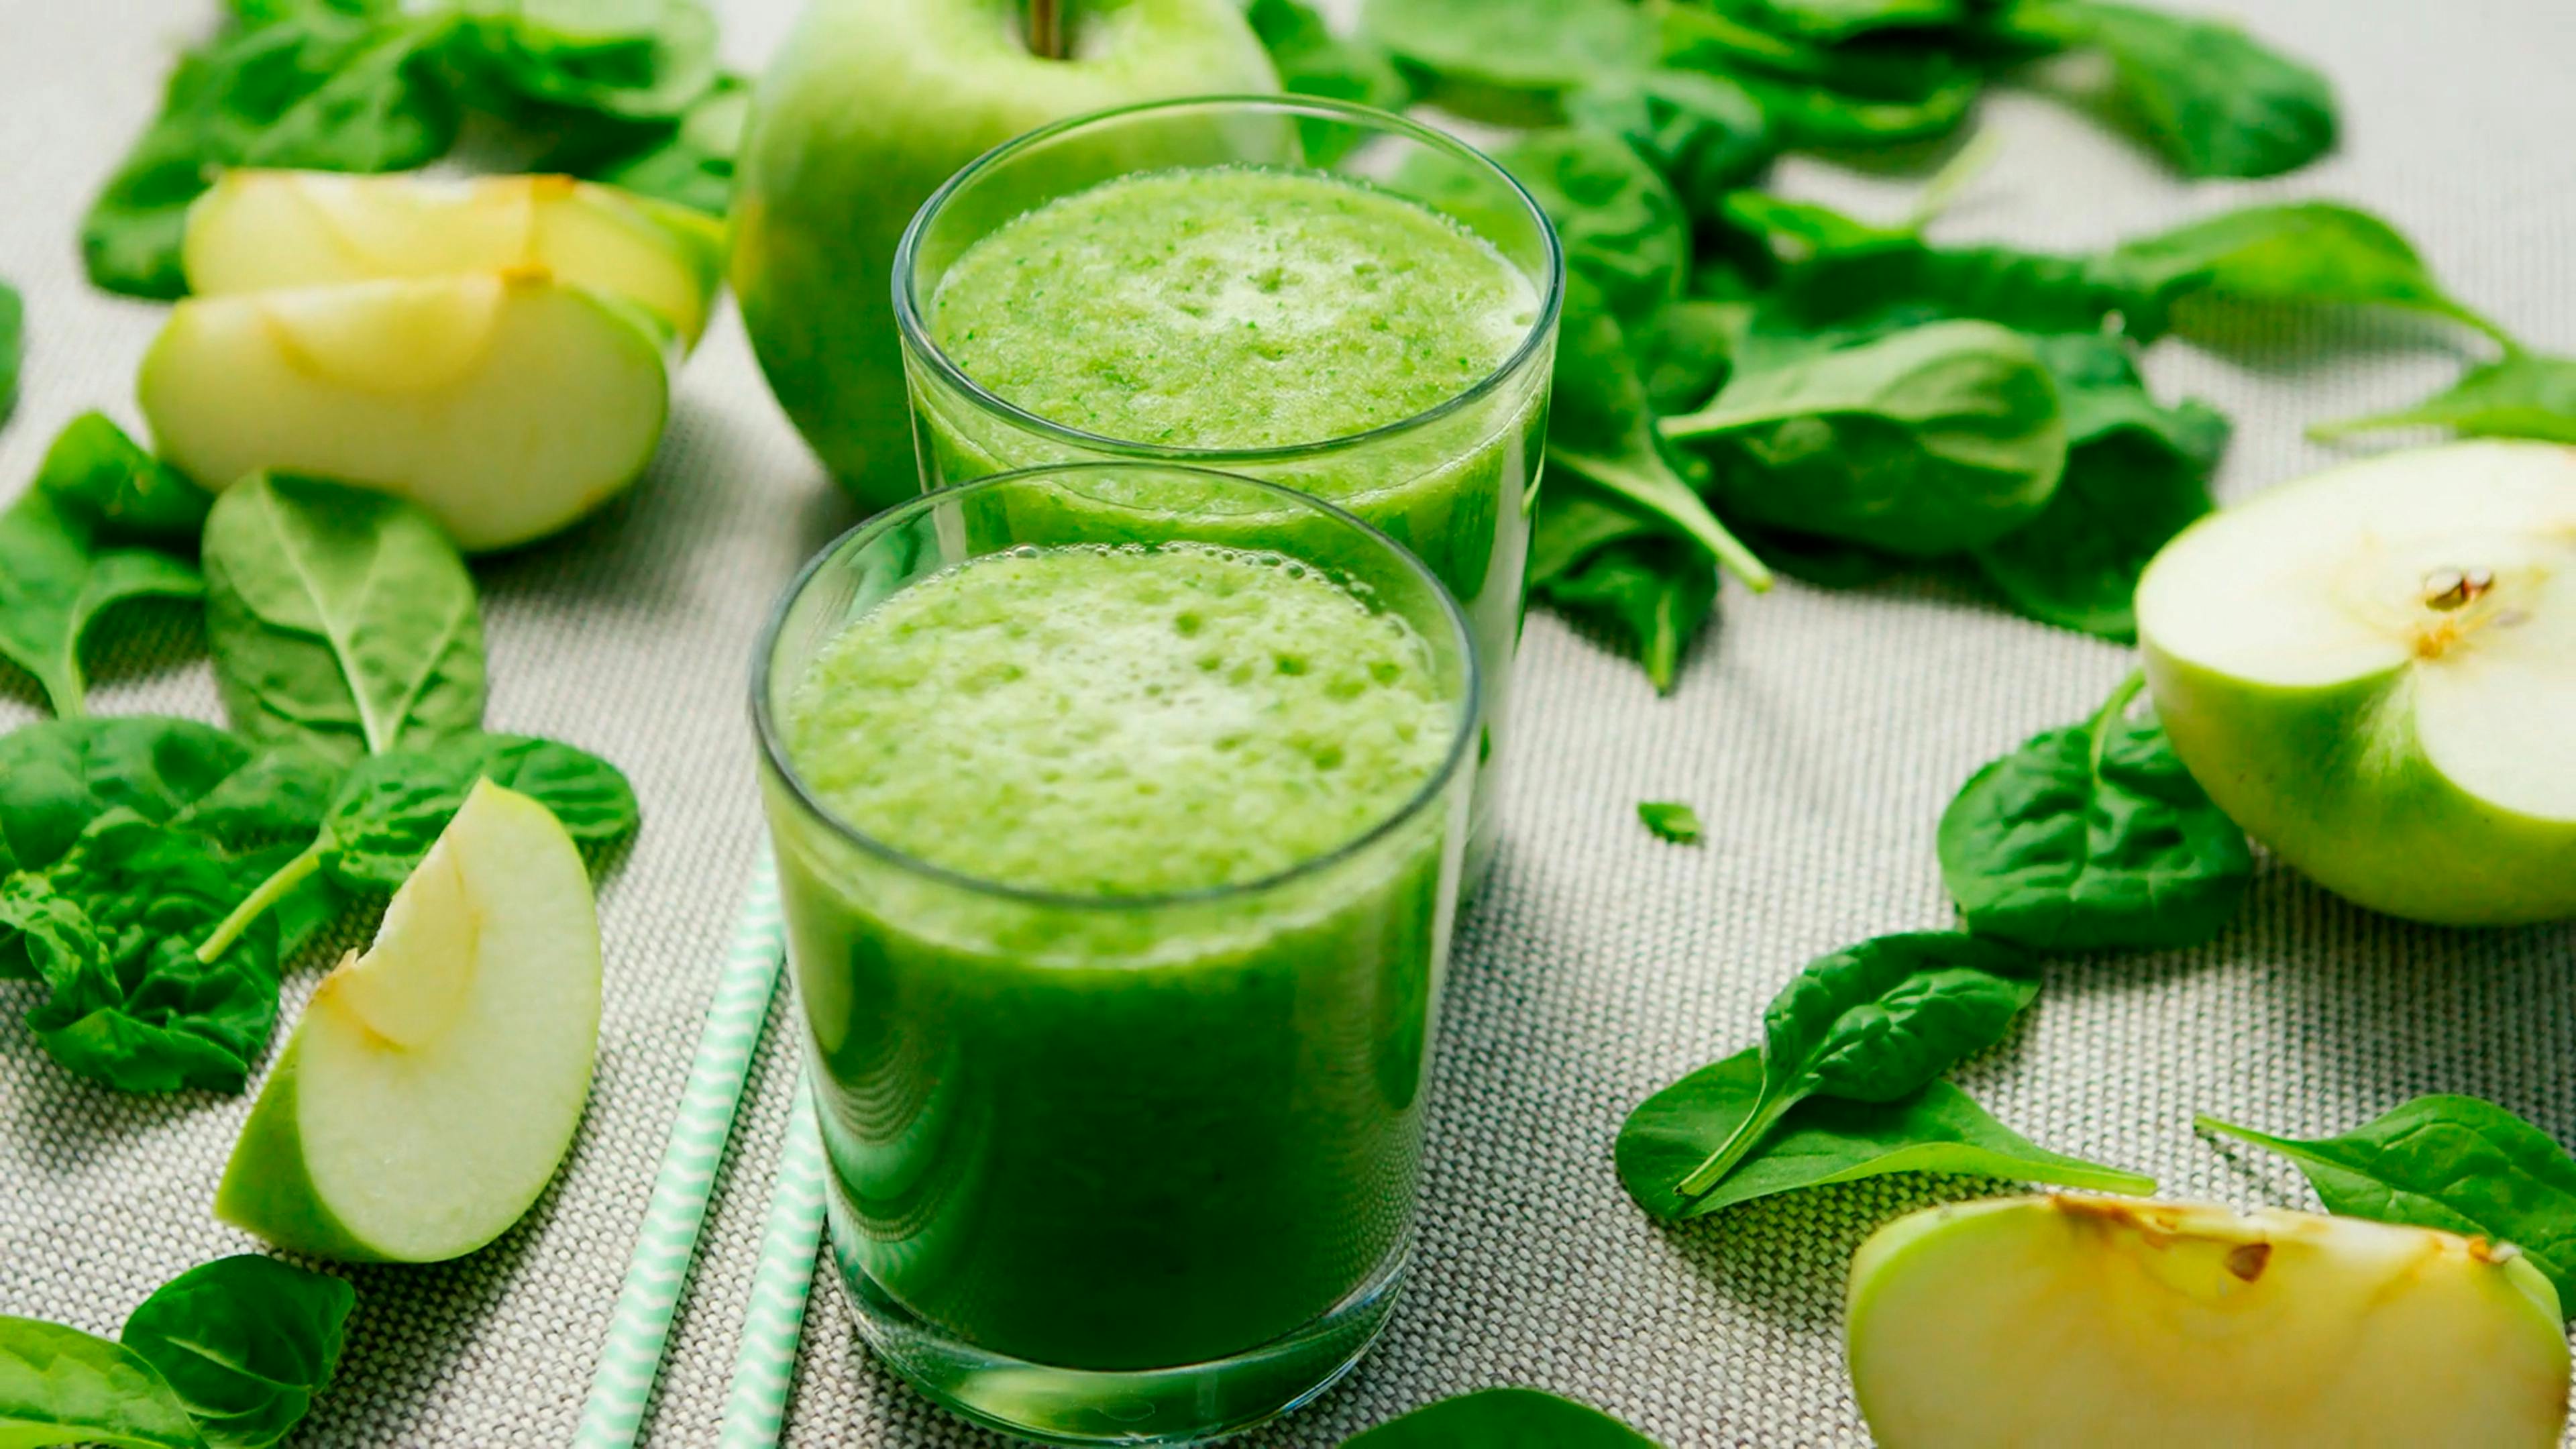 How can green smoothies help you with long-term Weight Loss